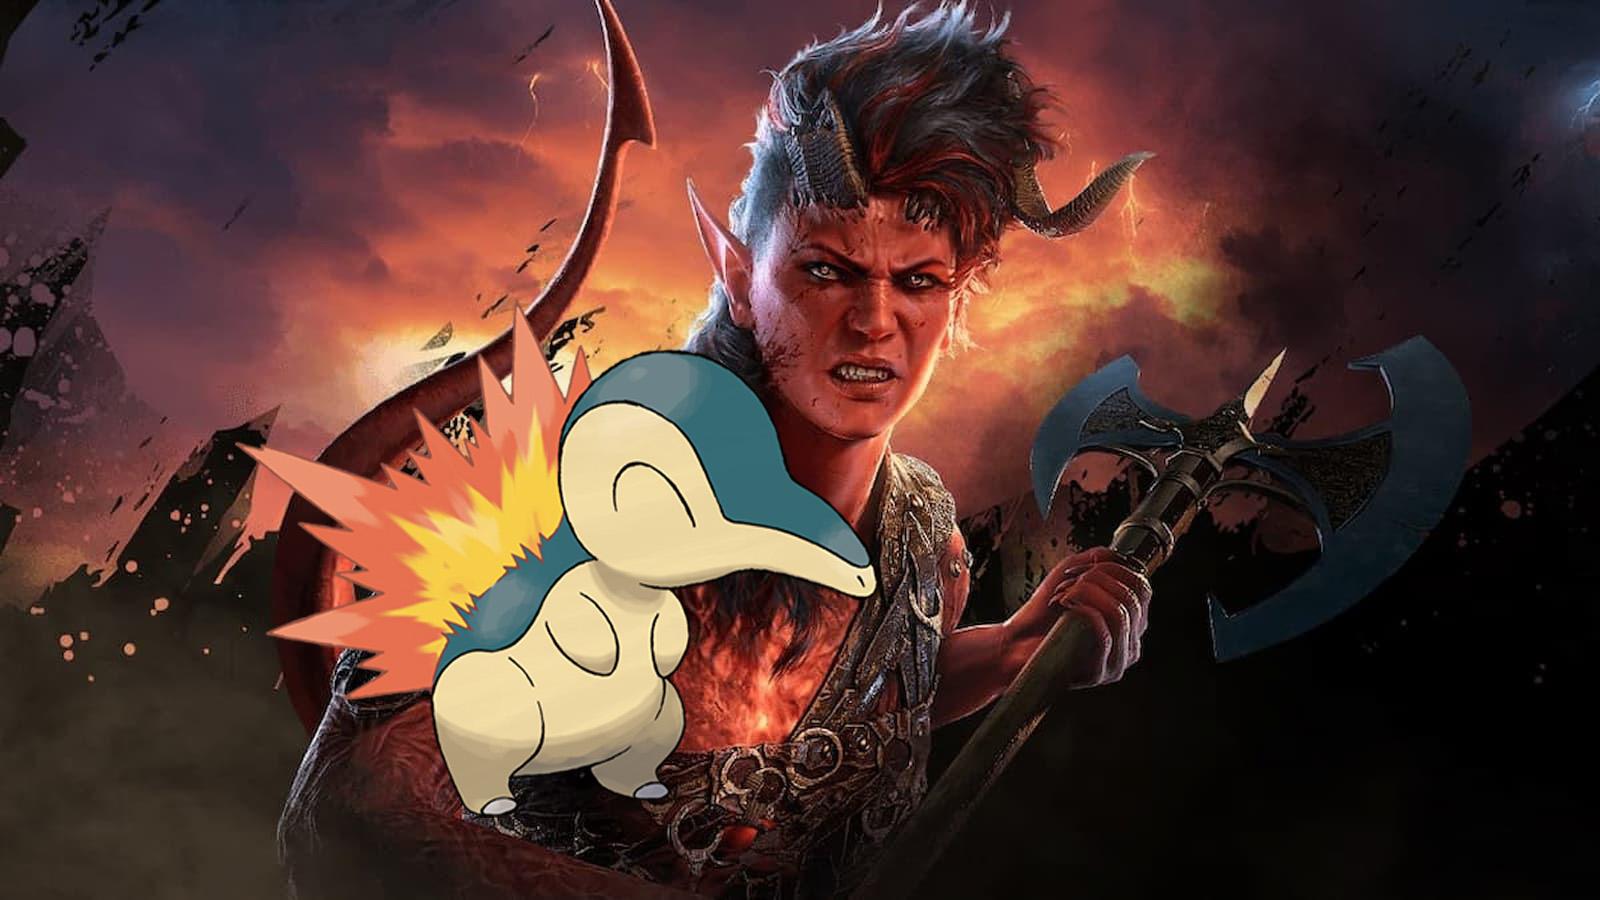 Karlach with a Cyndaquil from Pokemon in Baldur's Gate 3